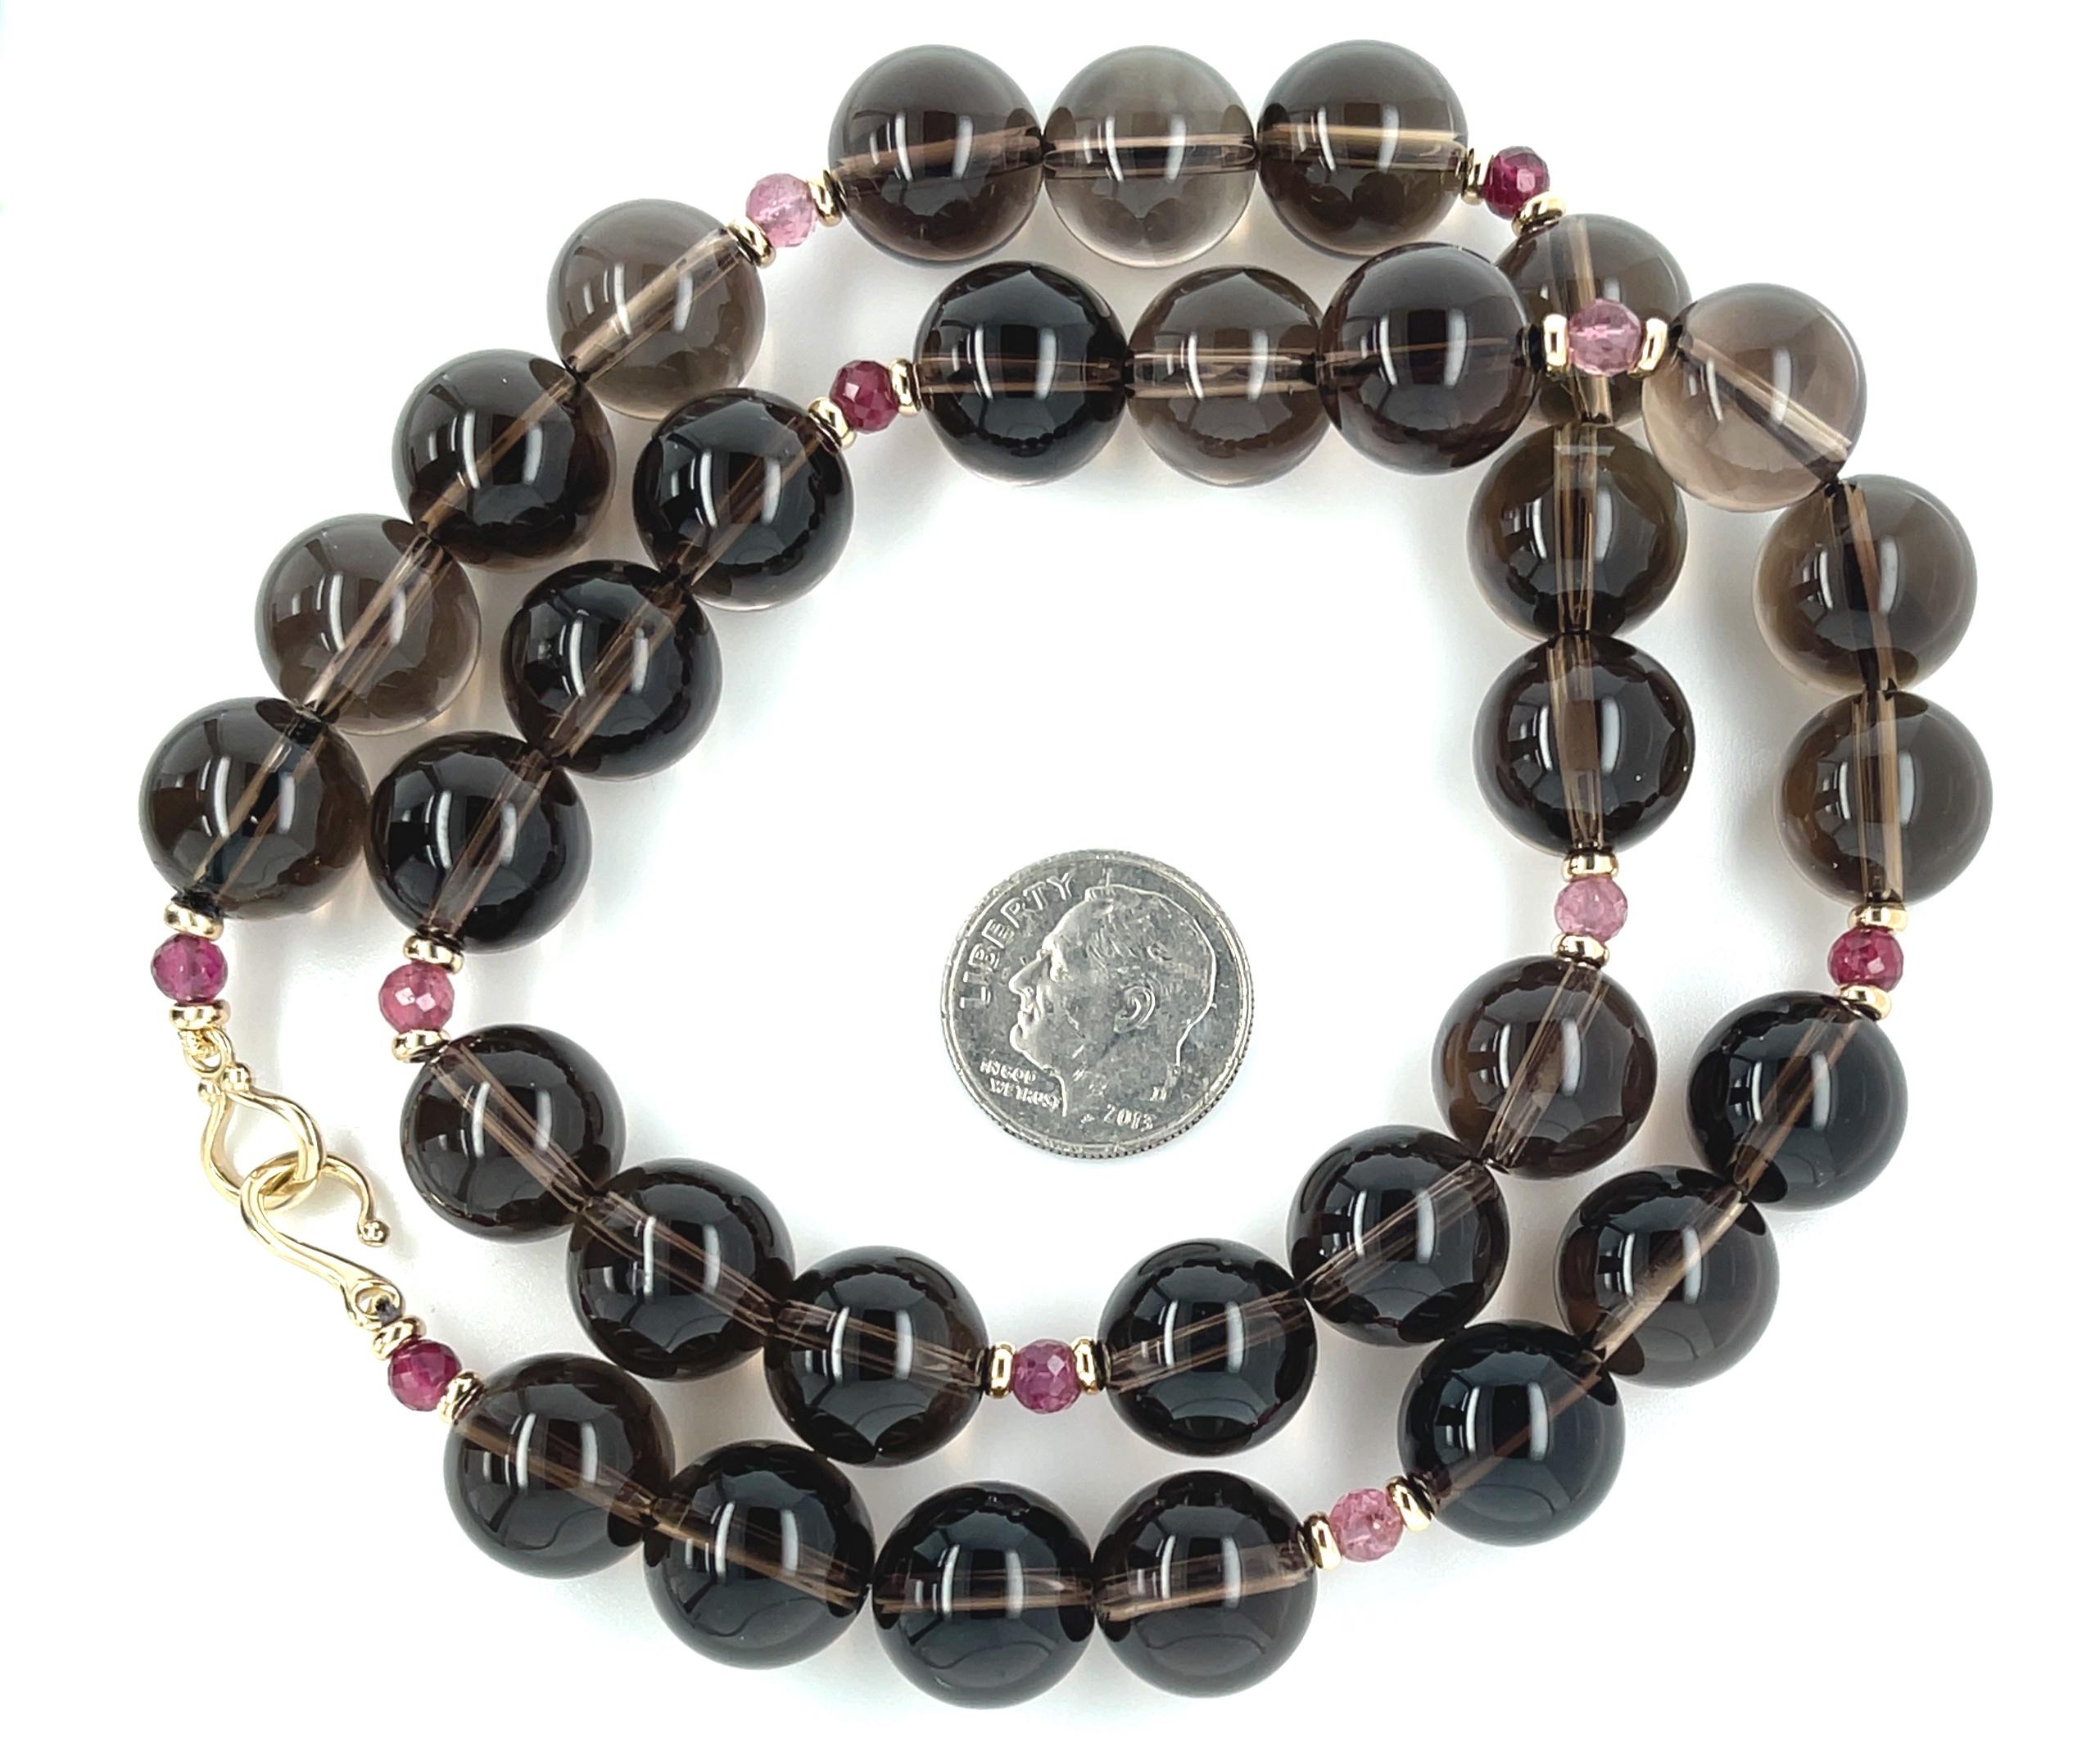 Women's 12mm Smoky Quartz and Pink Tourmaline Beaded Necklace with Yellow Gold Accents